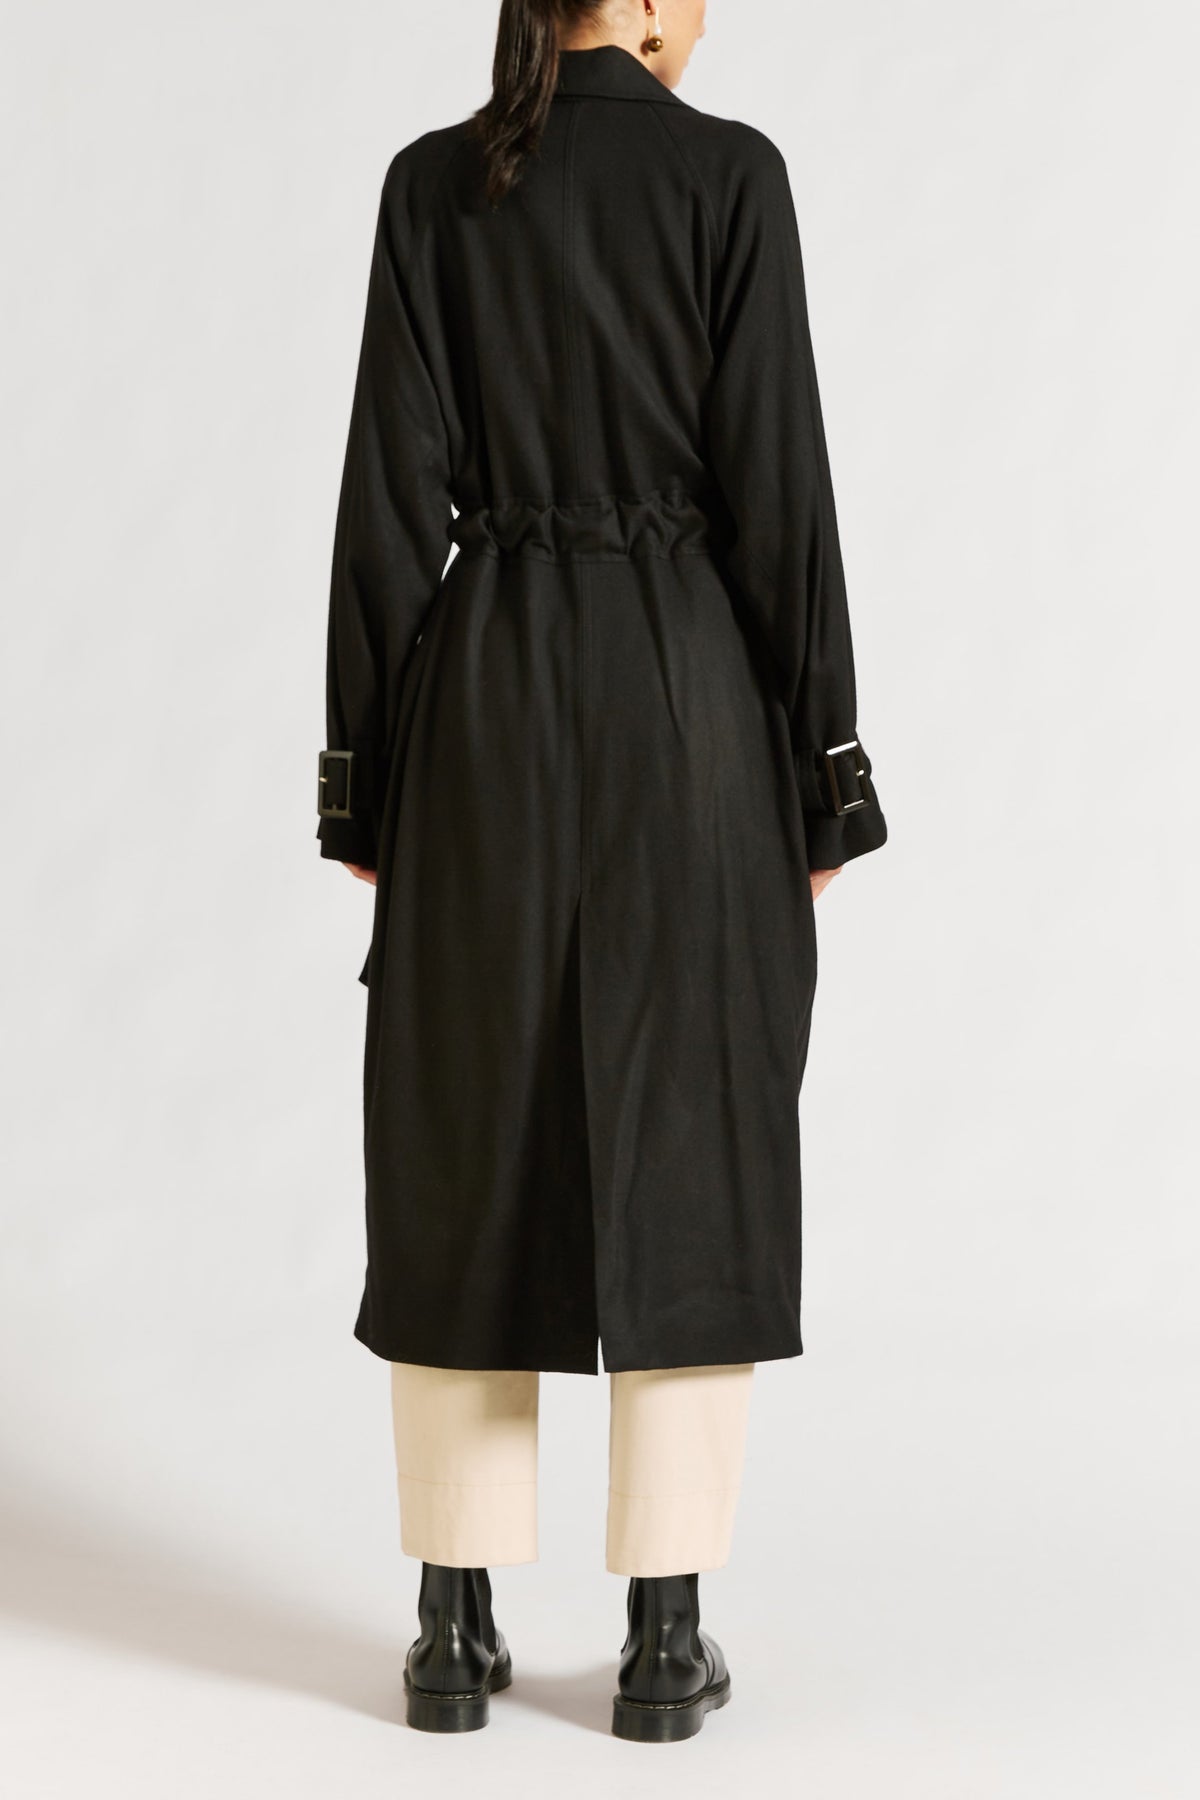 Lee Mathews | Logan Double Breasted Trench in Black